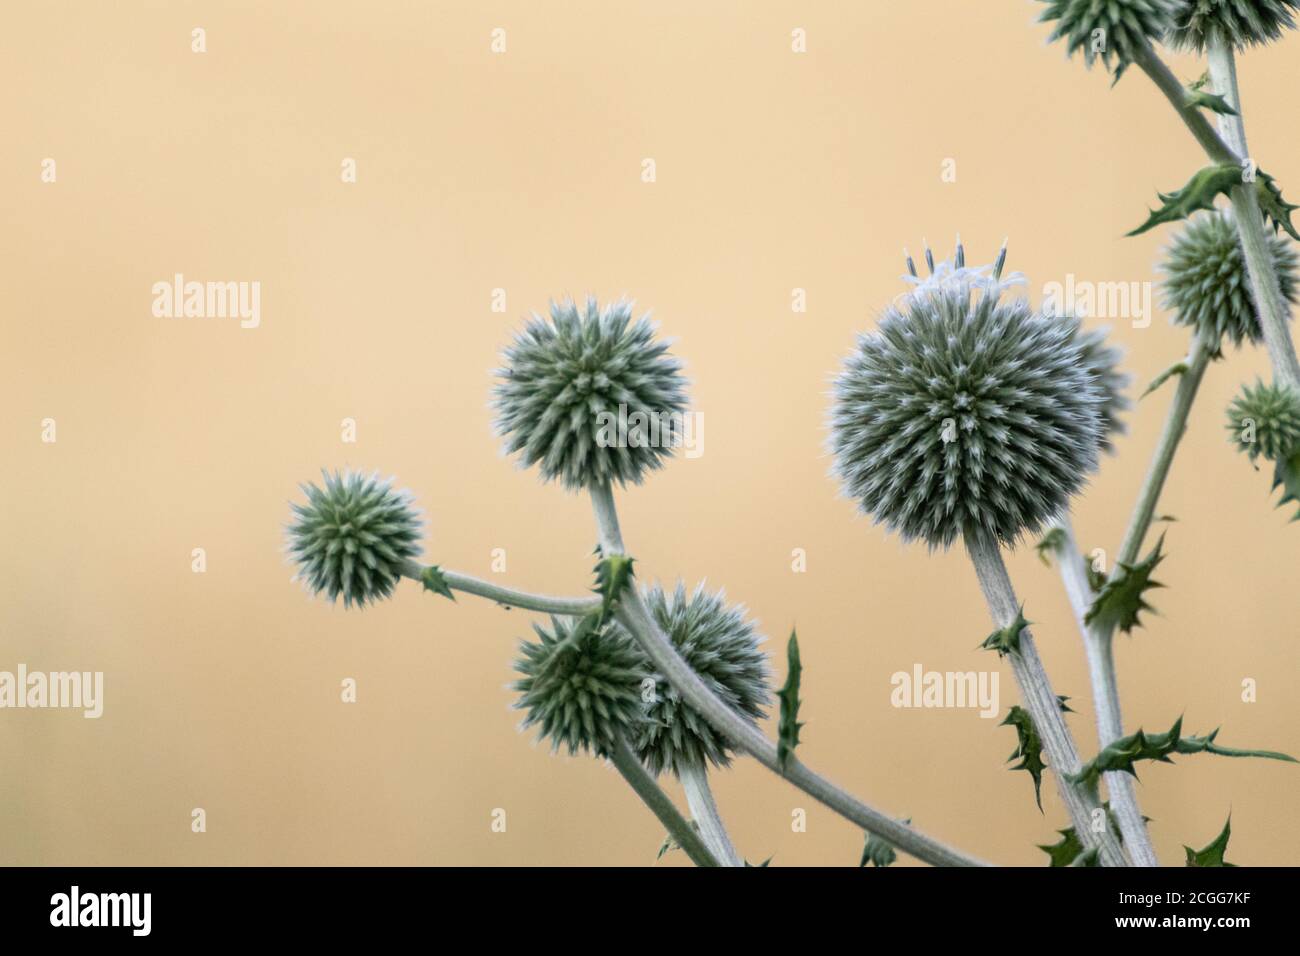 Globe thistle ball-shaped green flowers macro. Echinops ritro wild prickly grass on blurred beige yellow background. Copy space natural modern detaile Stock Photo